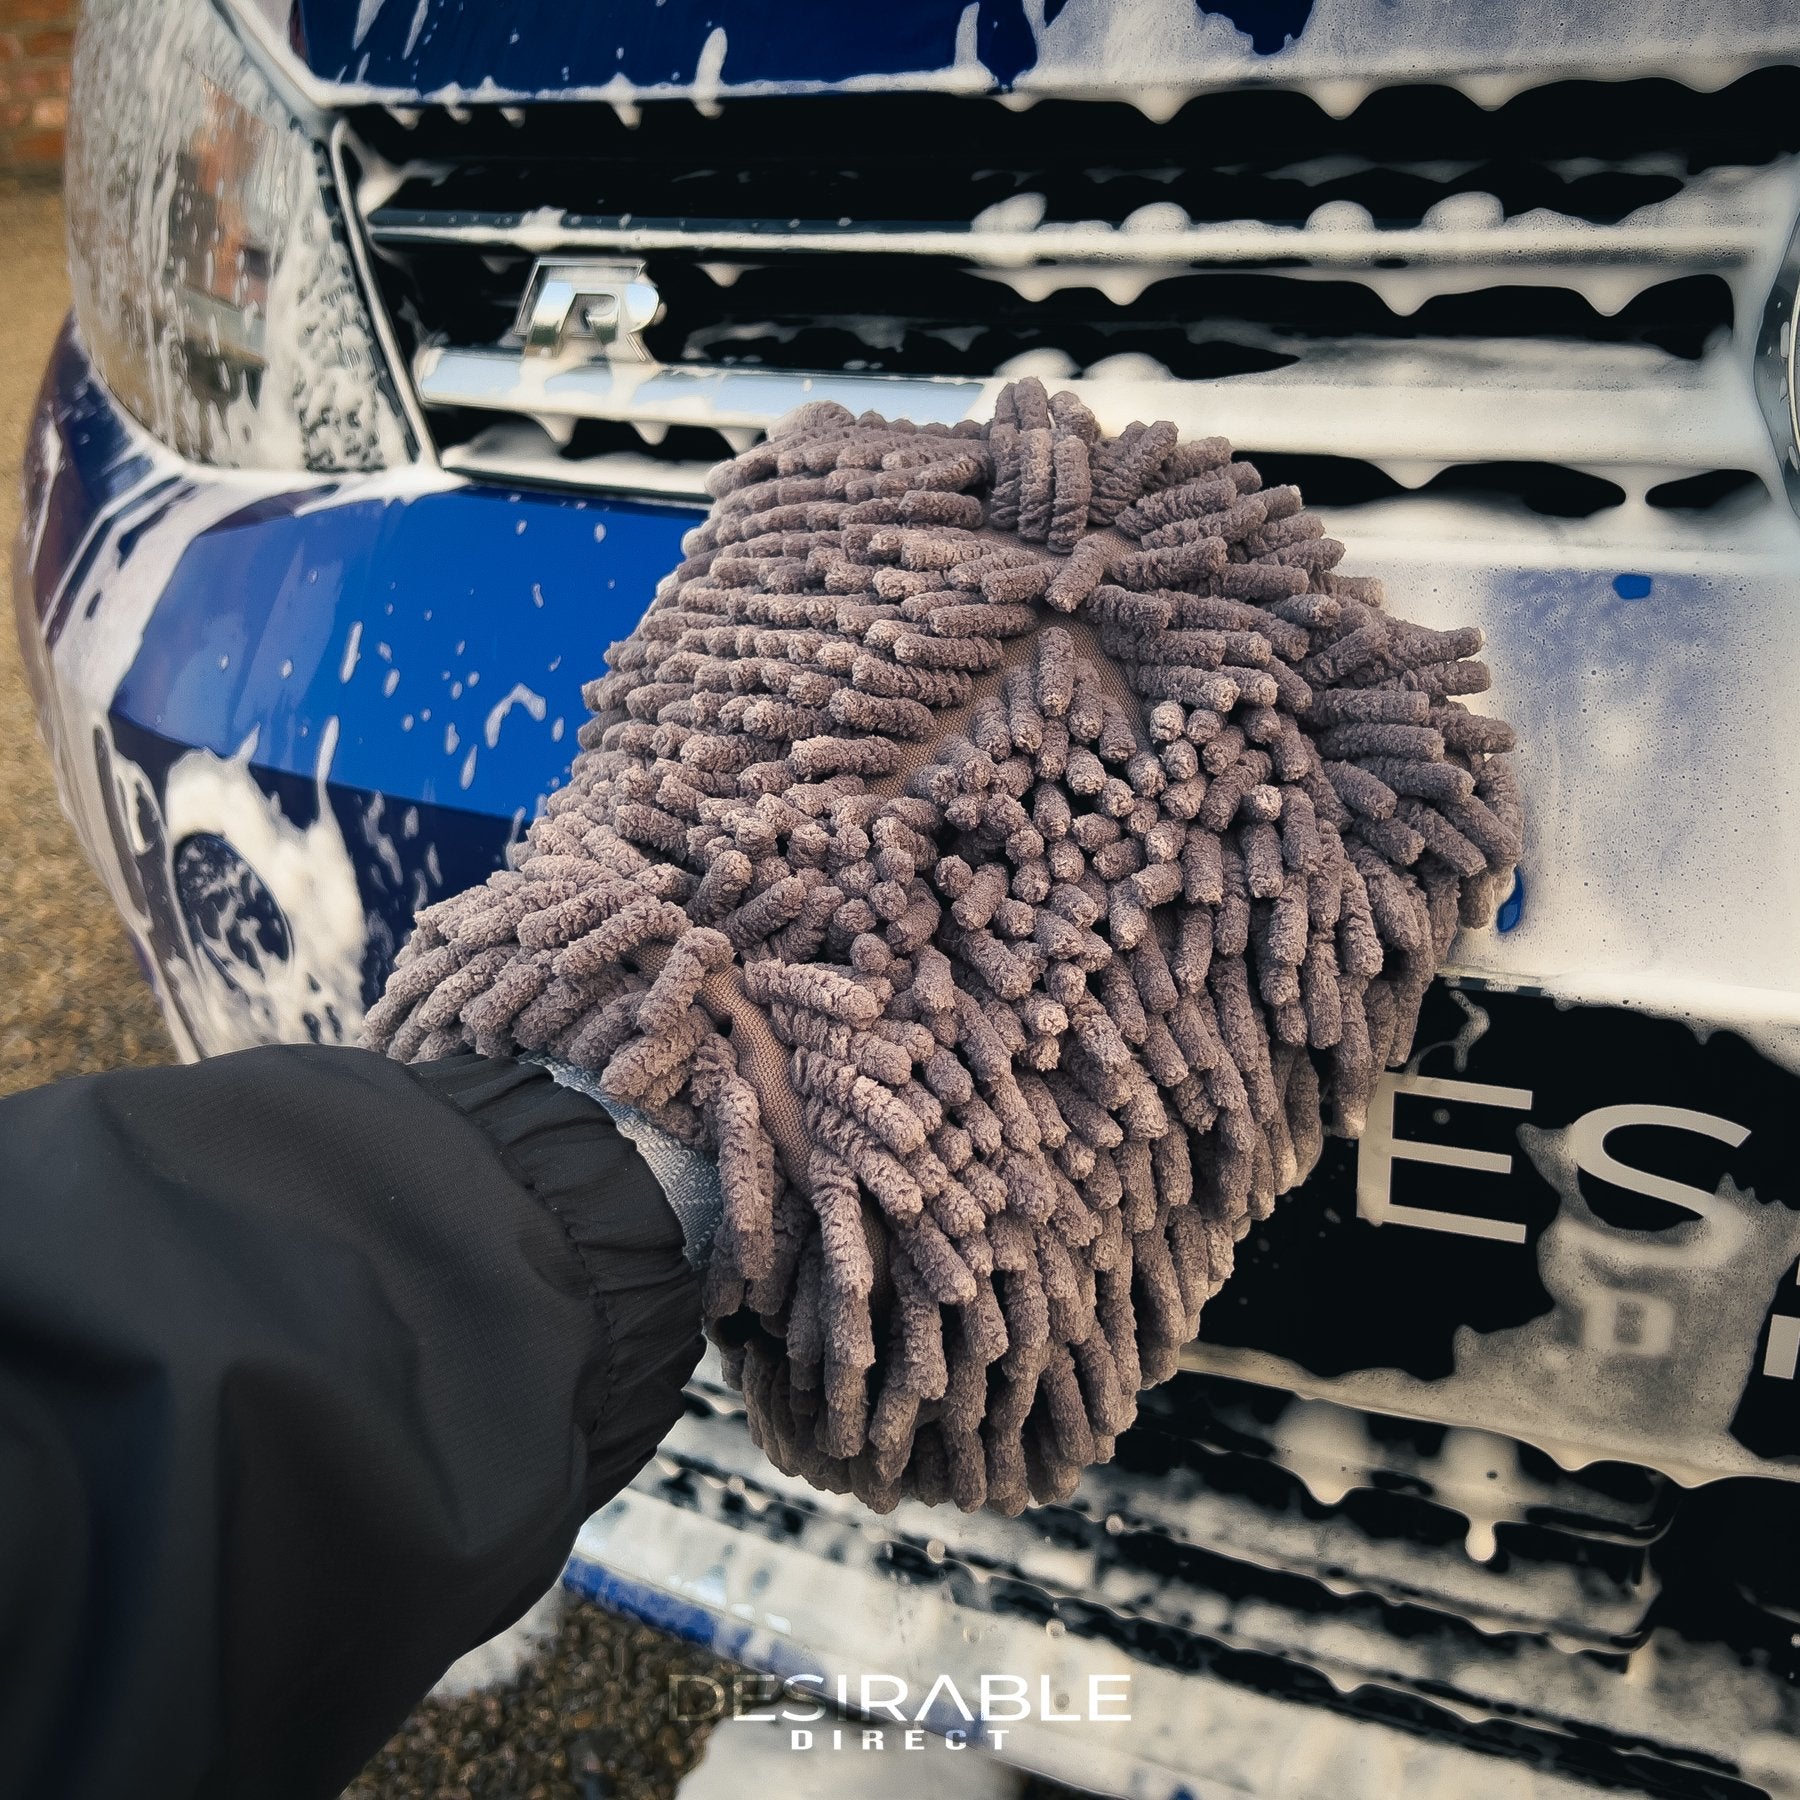 Car care noodle chenille grey wash mitt cleaning the front of a blue volkswagen golf r covered in car shampoo.